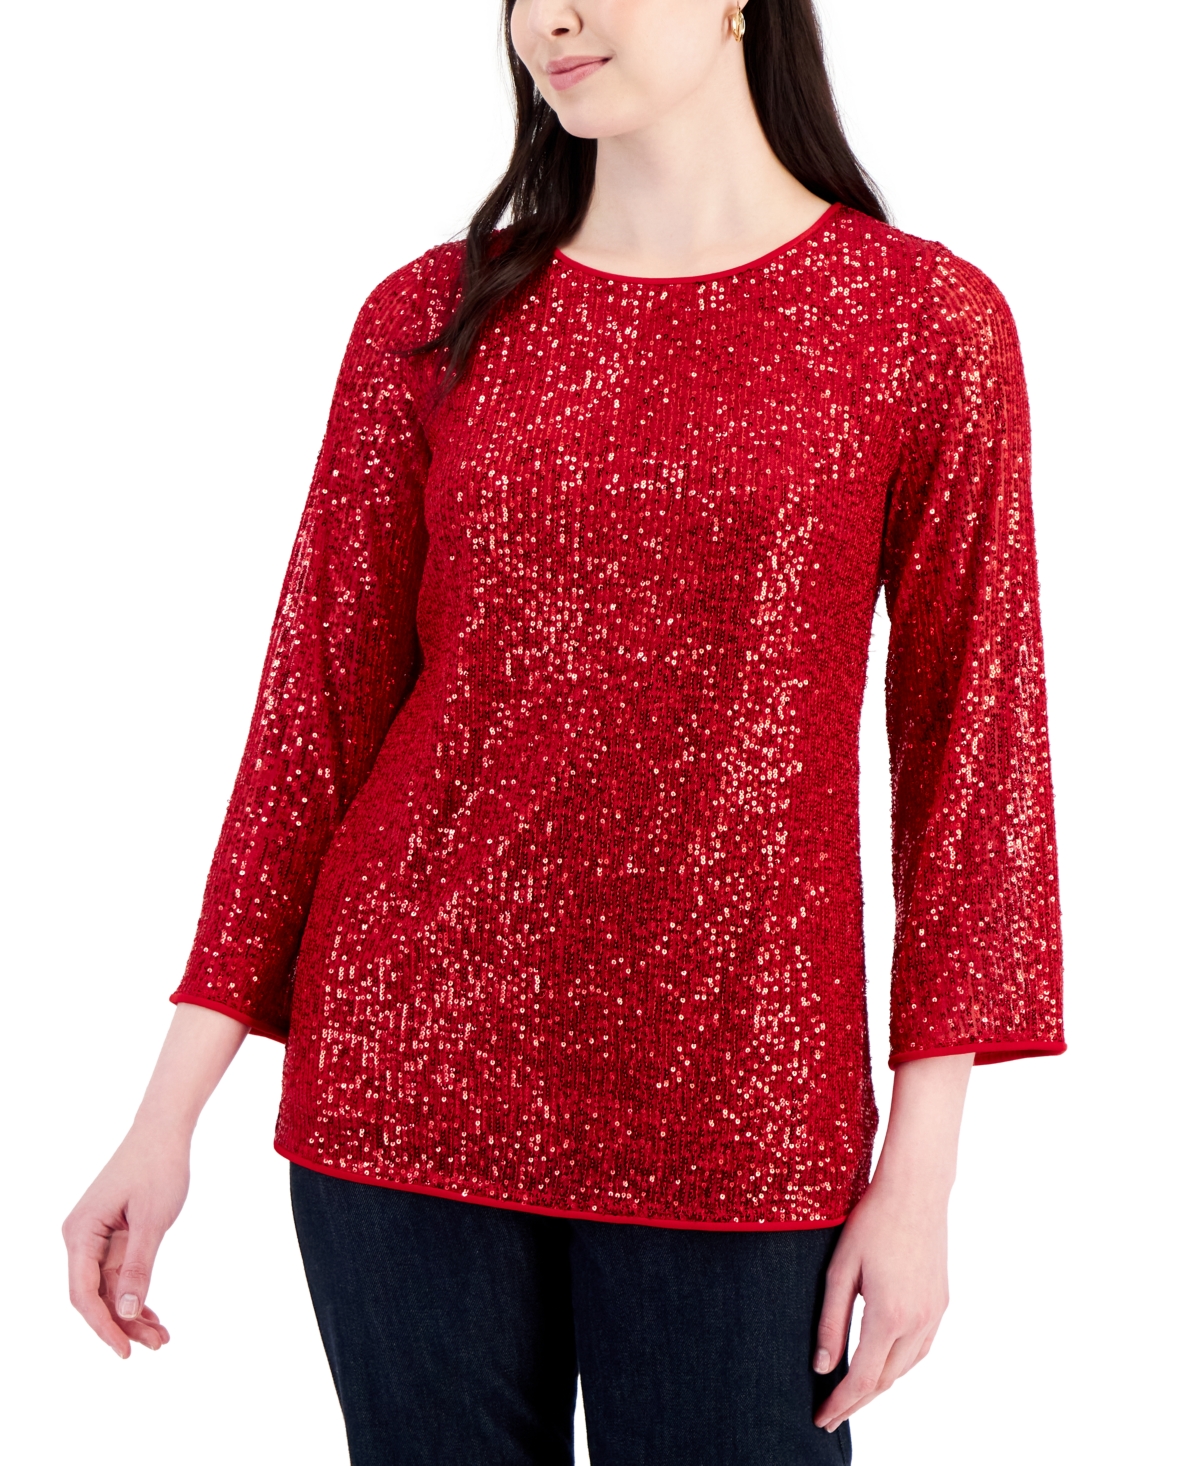 Women's Scoop-Neck 3/4-Sleeve Sequin Tunic, Created for Macy's - Real Red